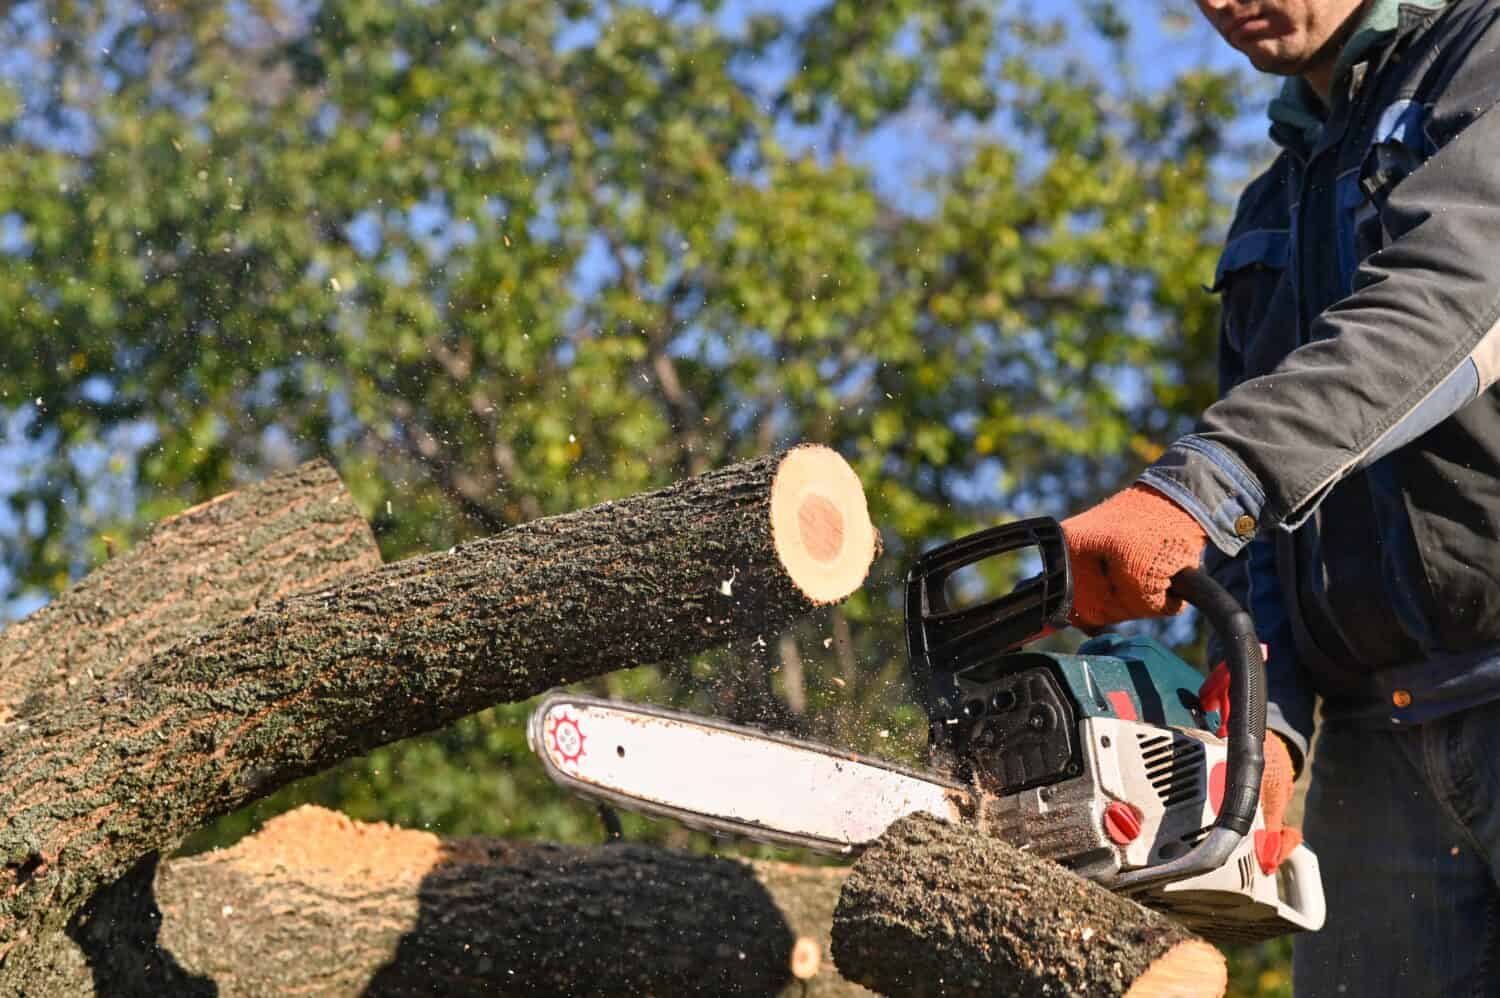 The man sawed off a log with a chainsaw. The sawn log falls.